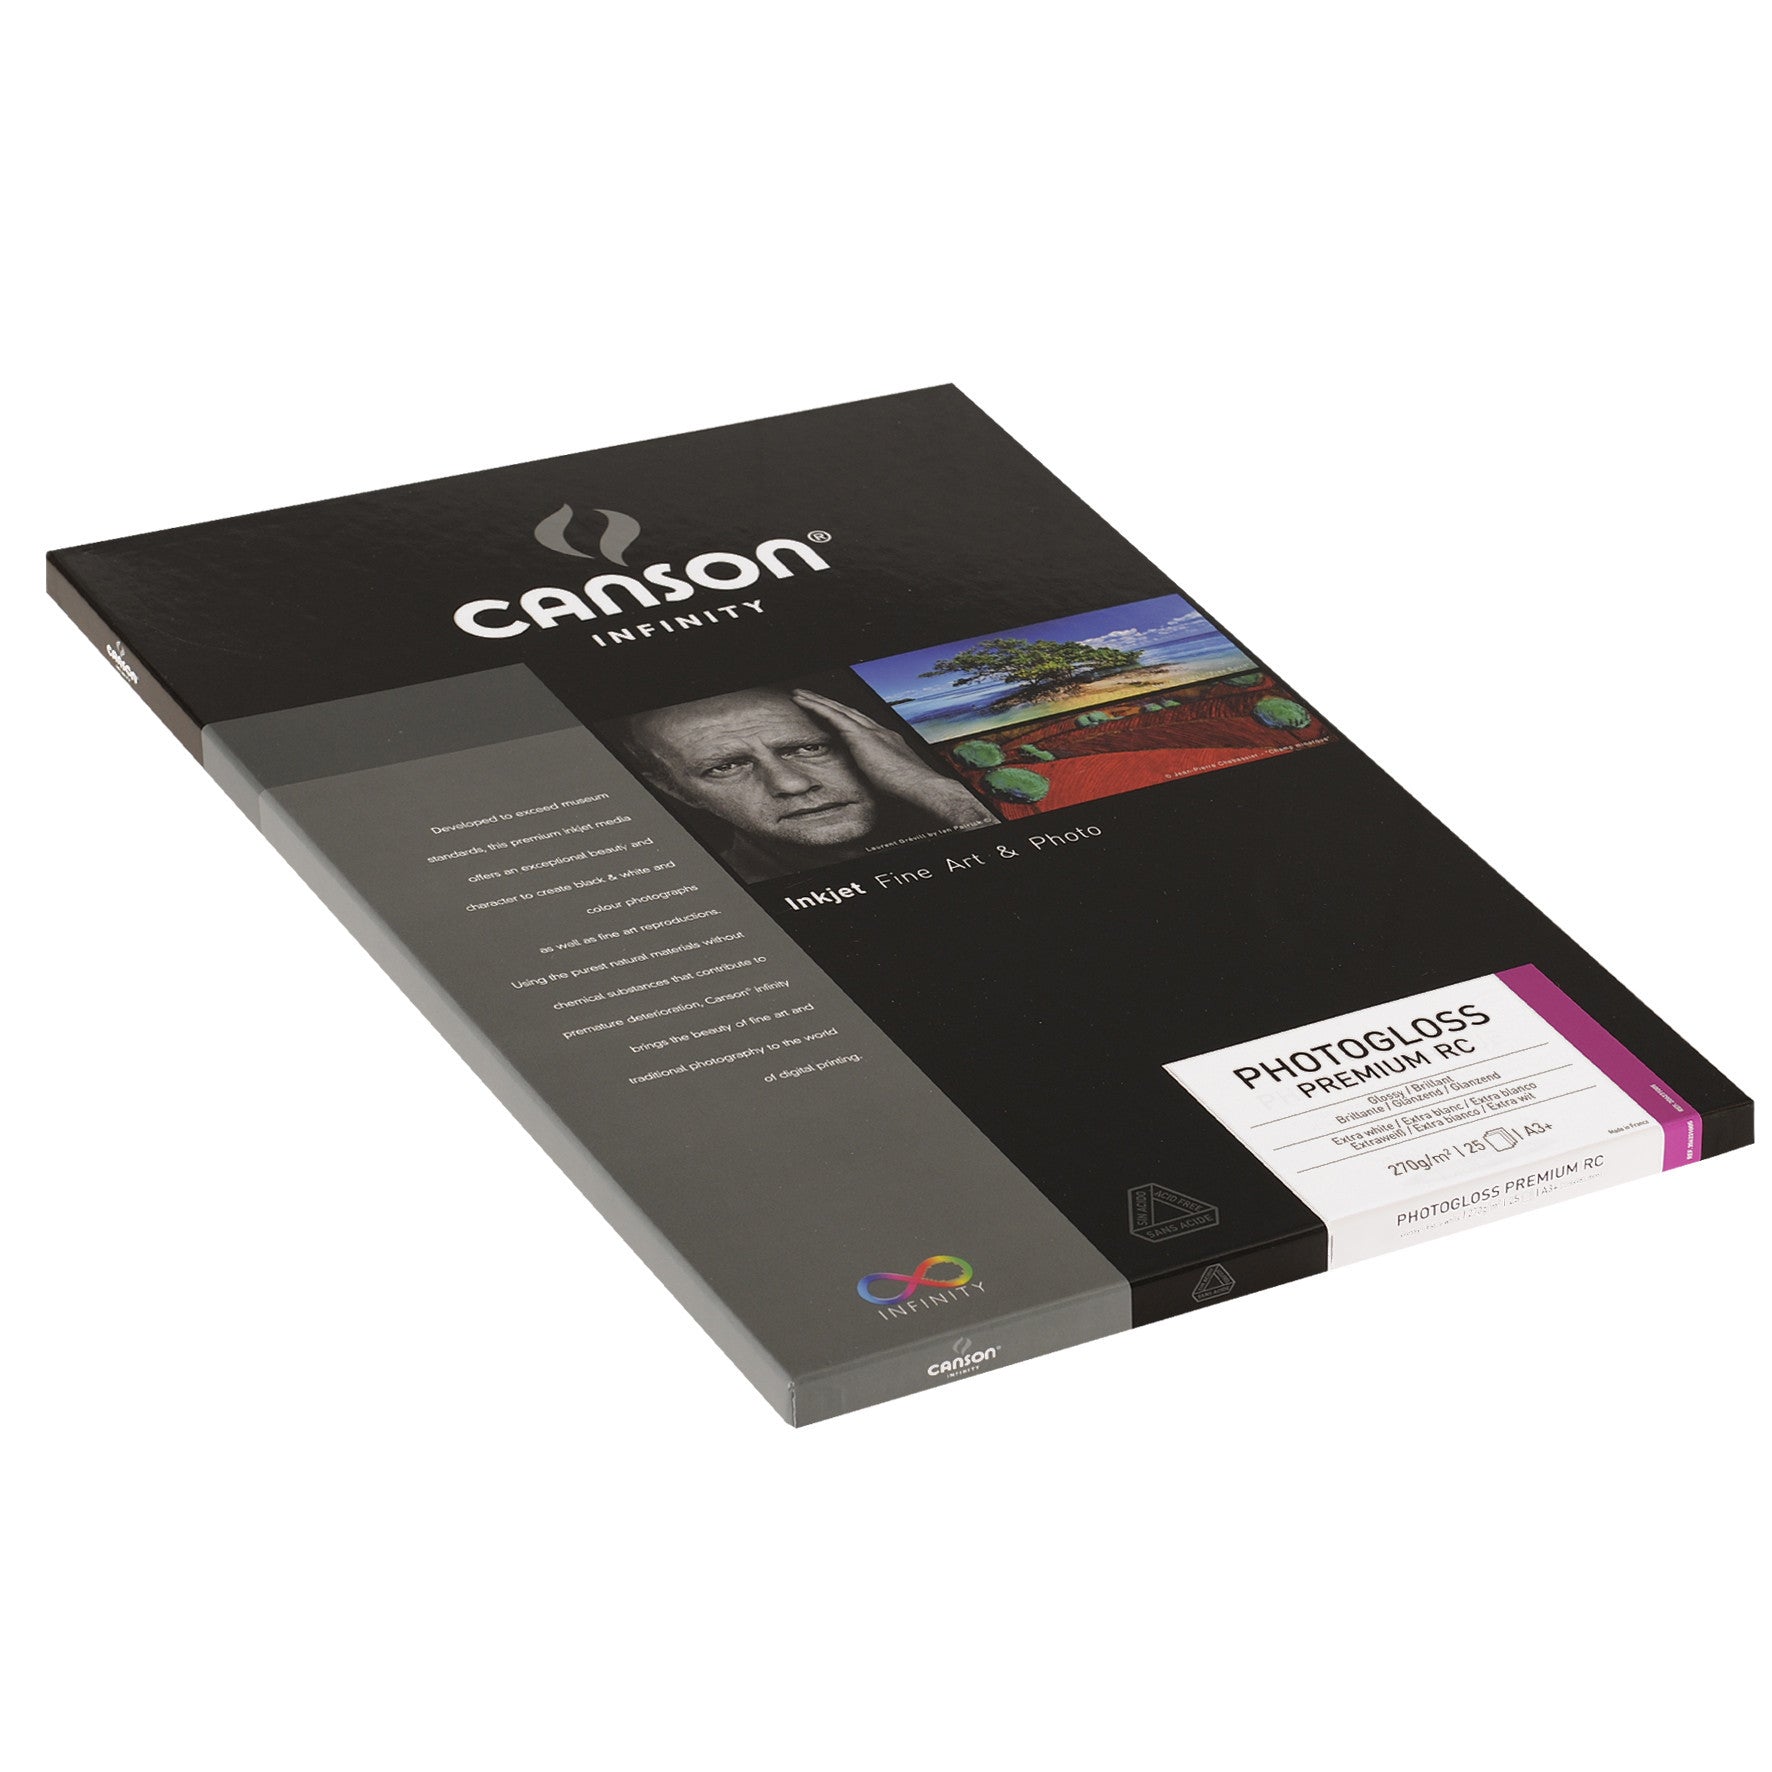 Canson Infinity Photo Gloss Premium RC - 270gsm - A3+ - 25 sheets - Wall Your Photos